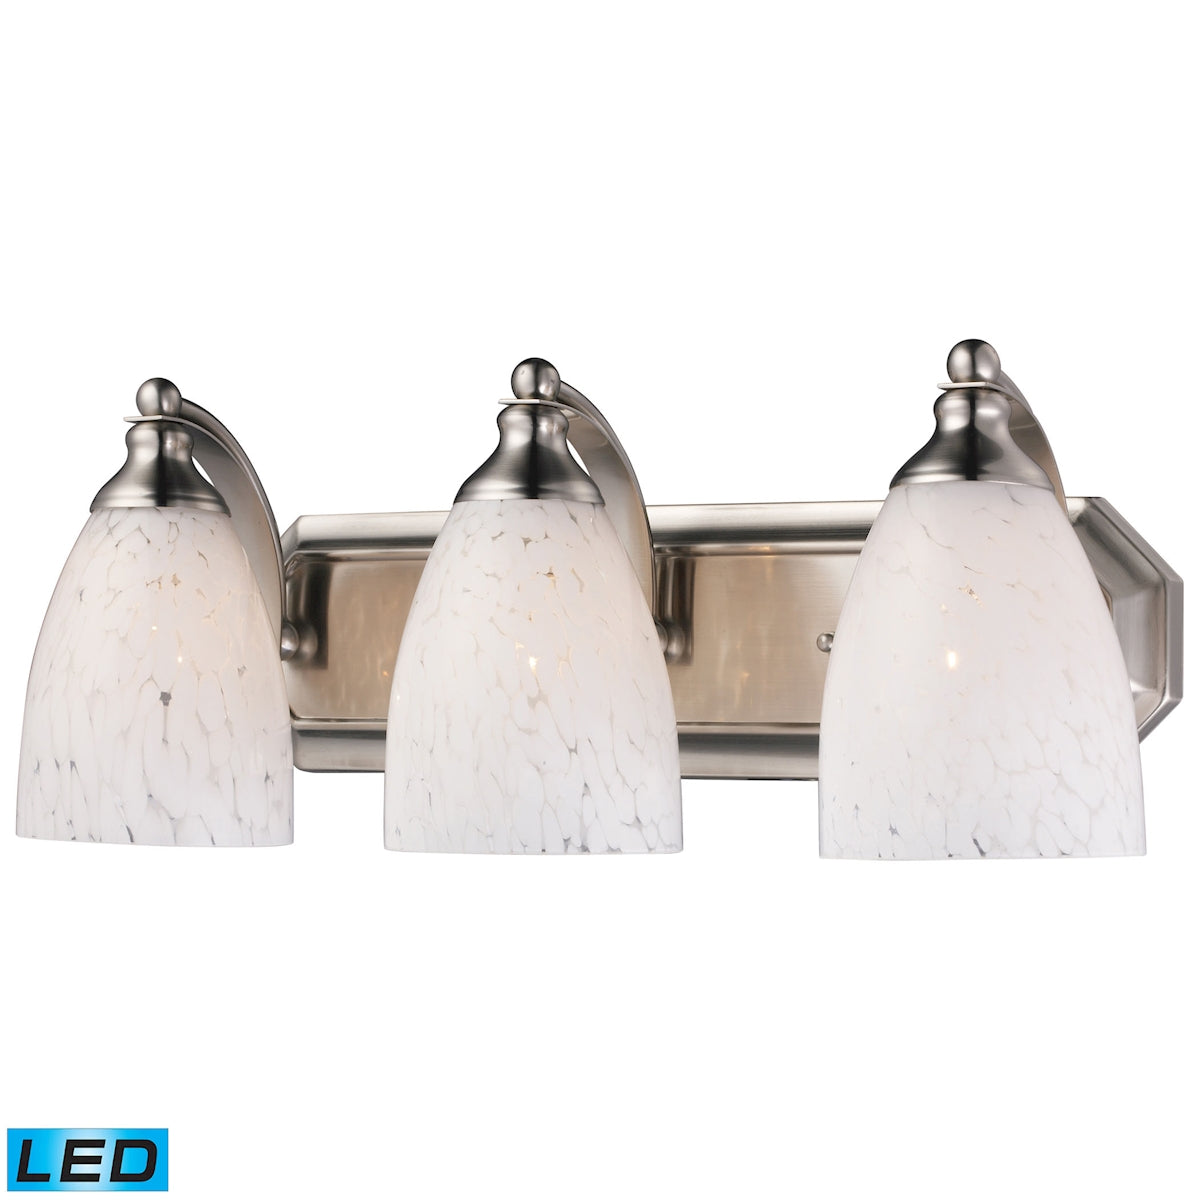 ELK Lighting 570-3N-SW-LED Mix-N-Match Vanity 3-Light Wall Lamp in Satin Nickel with Snow White Glass - Includes LED Bulbs